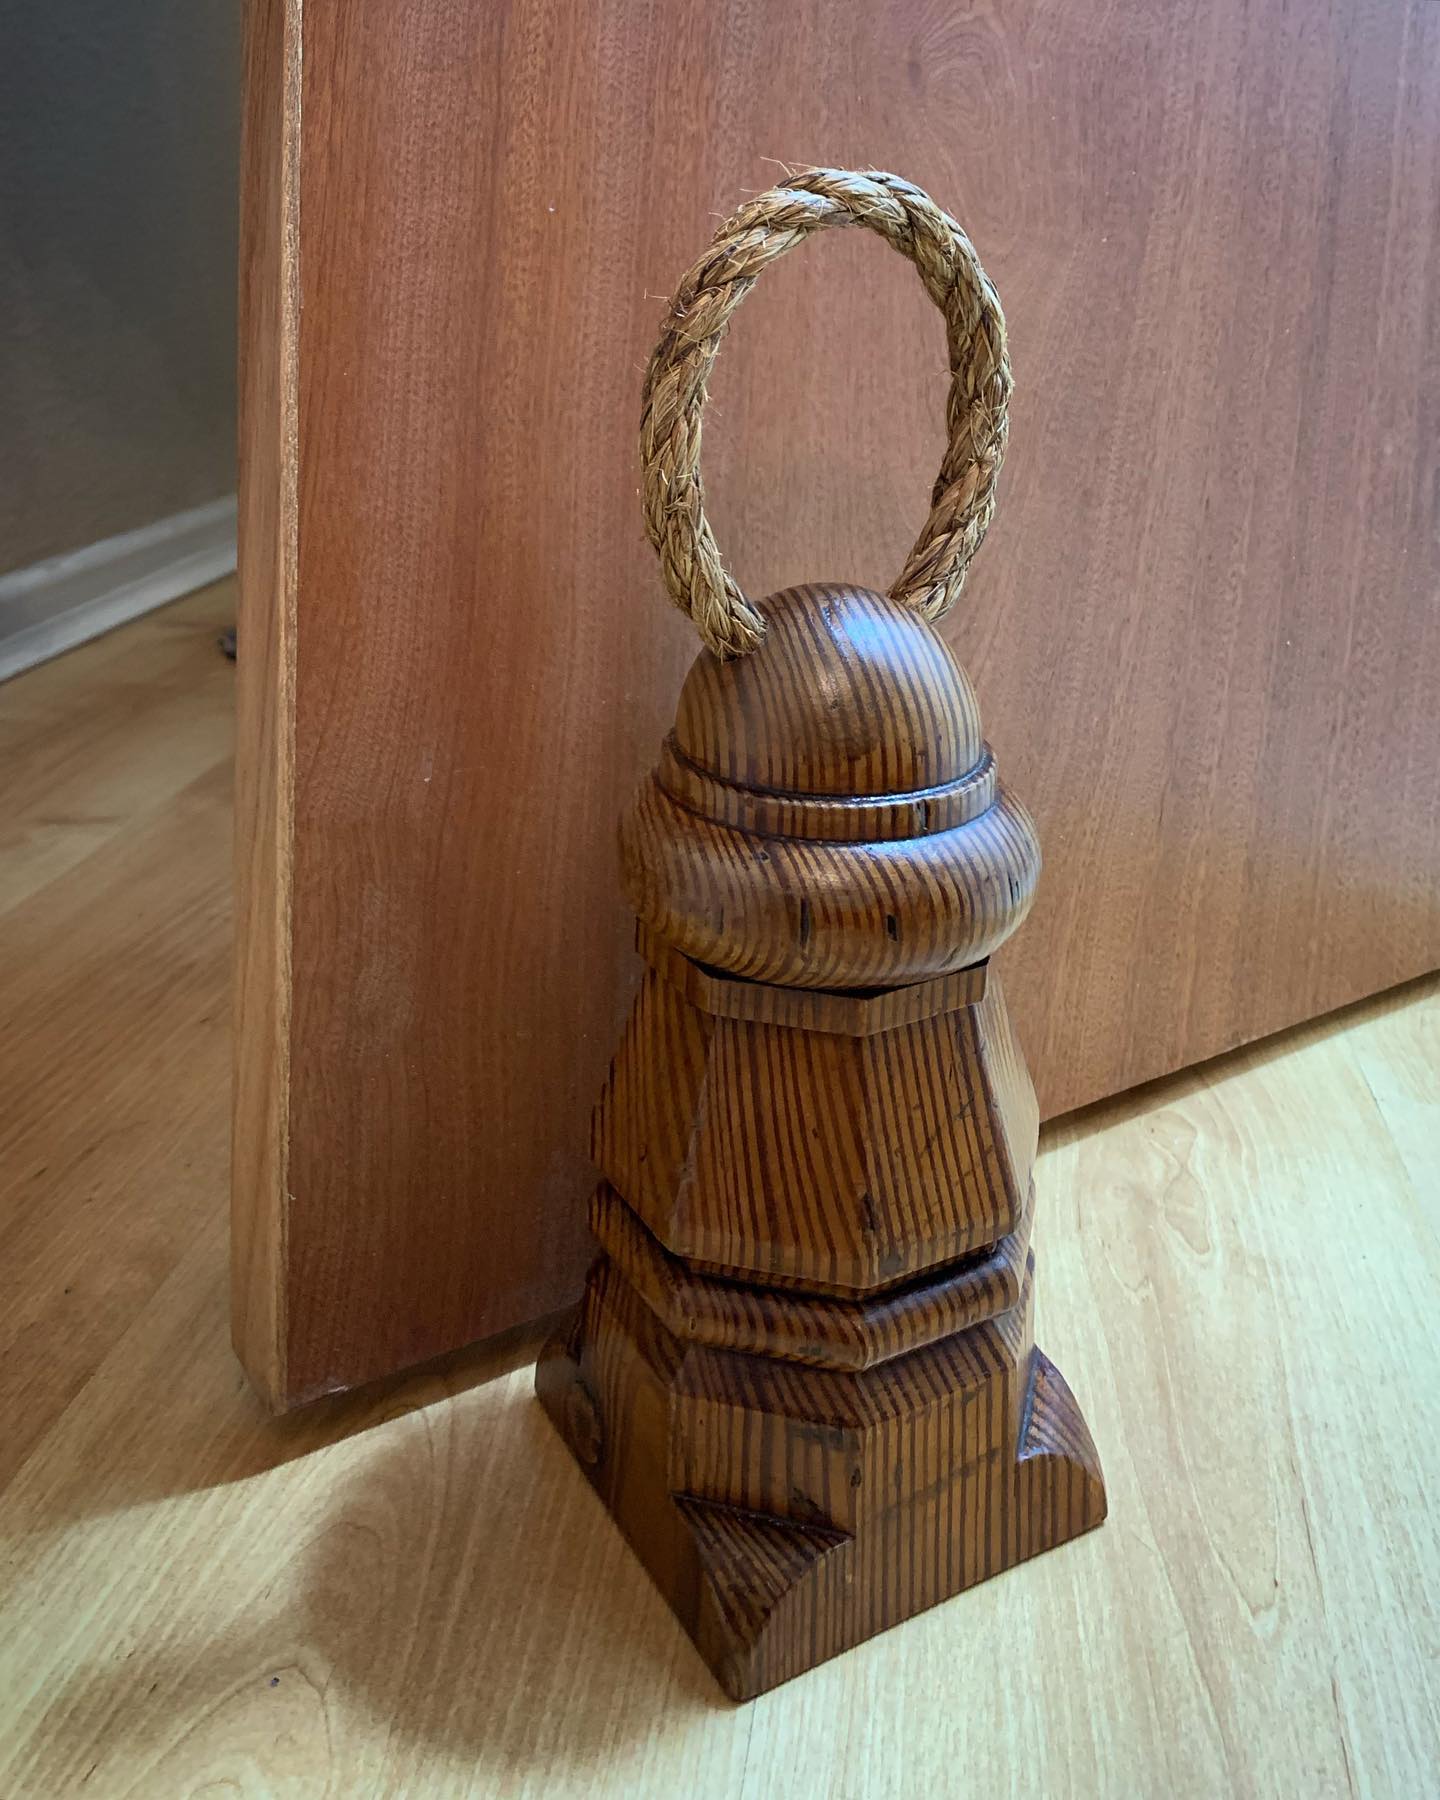 This handmade gift has been created from part of the church that members of my family have been going to for decades, so it’s quite sentimental. The church has been lovingly renovated over the past few years and we were super happy to get a small piece of the old newel post to transform into items people can make use of and treasure for years to come. #sentimental #homedecor #history #home #reuse #treasure #reclaimed